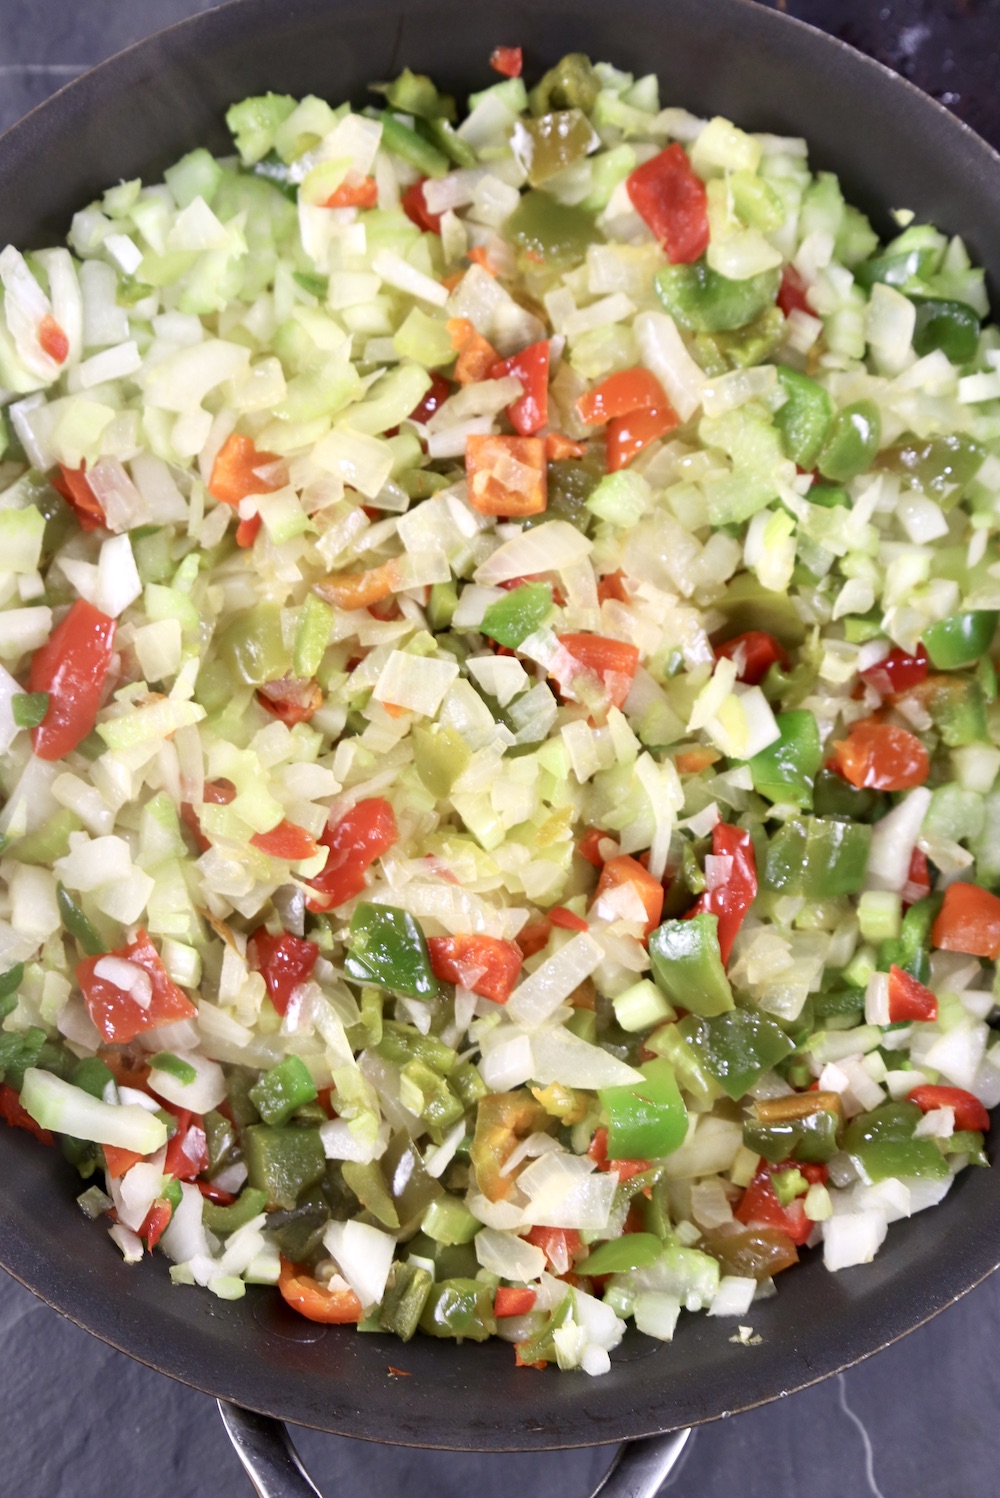 Cooked peppers, onions,celery in a skillet